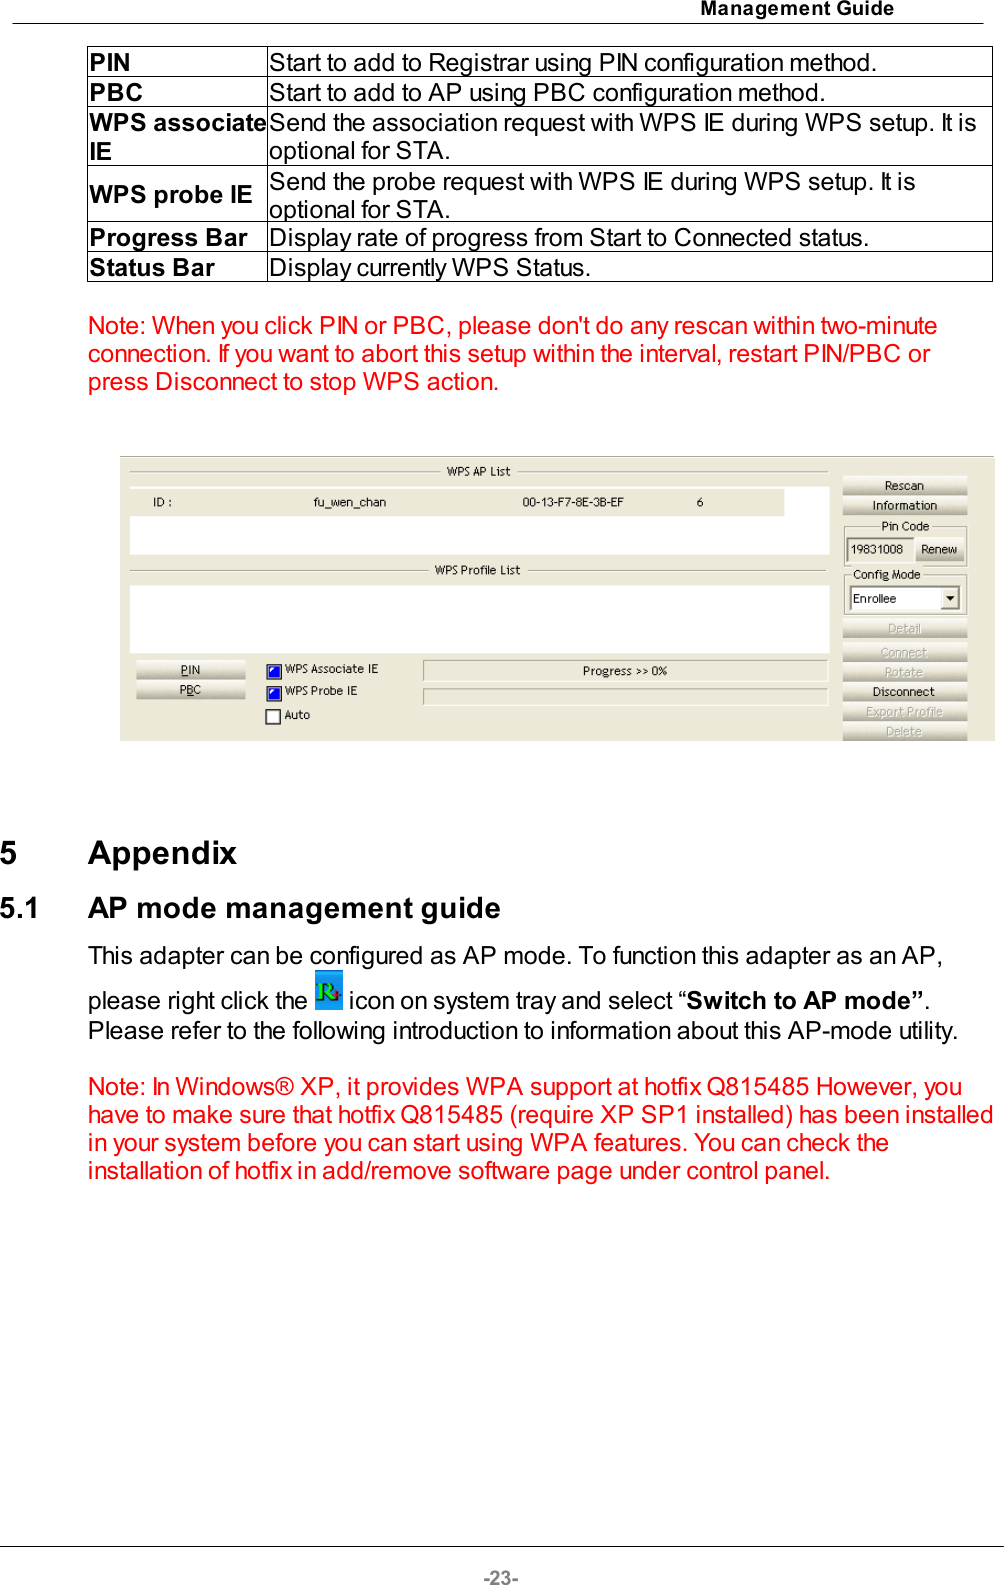 Management Guide-23-PINStart to add to Registrar using PIN configuration method.PBCStart to add to AP using PBC configuration method.WPS associateIE Send the association request with WPS IE during WPS setup. It isoptional for STA. WPS probe IESend the probe request with WPS IE during WPS setup. It isoptional for STA.Progress BarDisplay rate of progress from Start to Connected status.Status BarDisplay currently WPS Status.Note: When you click PIN or PBC, please don&apos;t do any rescan within two-minuteconnection. If you want to abort this setup within the interval, restart PIN/PBC orpress Disconnect to stop WPS action.5 Appendix5.1 AP mode management guideThis adapter can be configured as AP mode. To function this adapter as an AP,please right click the   icon on system tray and select “Switch to AP mode”.Please refer to the following introduction to information about this AP-mode utility.Note: In Windows® XP, it provides WPA support at hotfix Q815485 However, youhave to make sure that hotfix Q815485 (require XP SP1 installed) has been installedin your system before you can start using WPA features. You can check theinstallation of hotfix in add/remove software page under control panel.